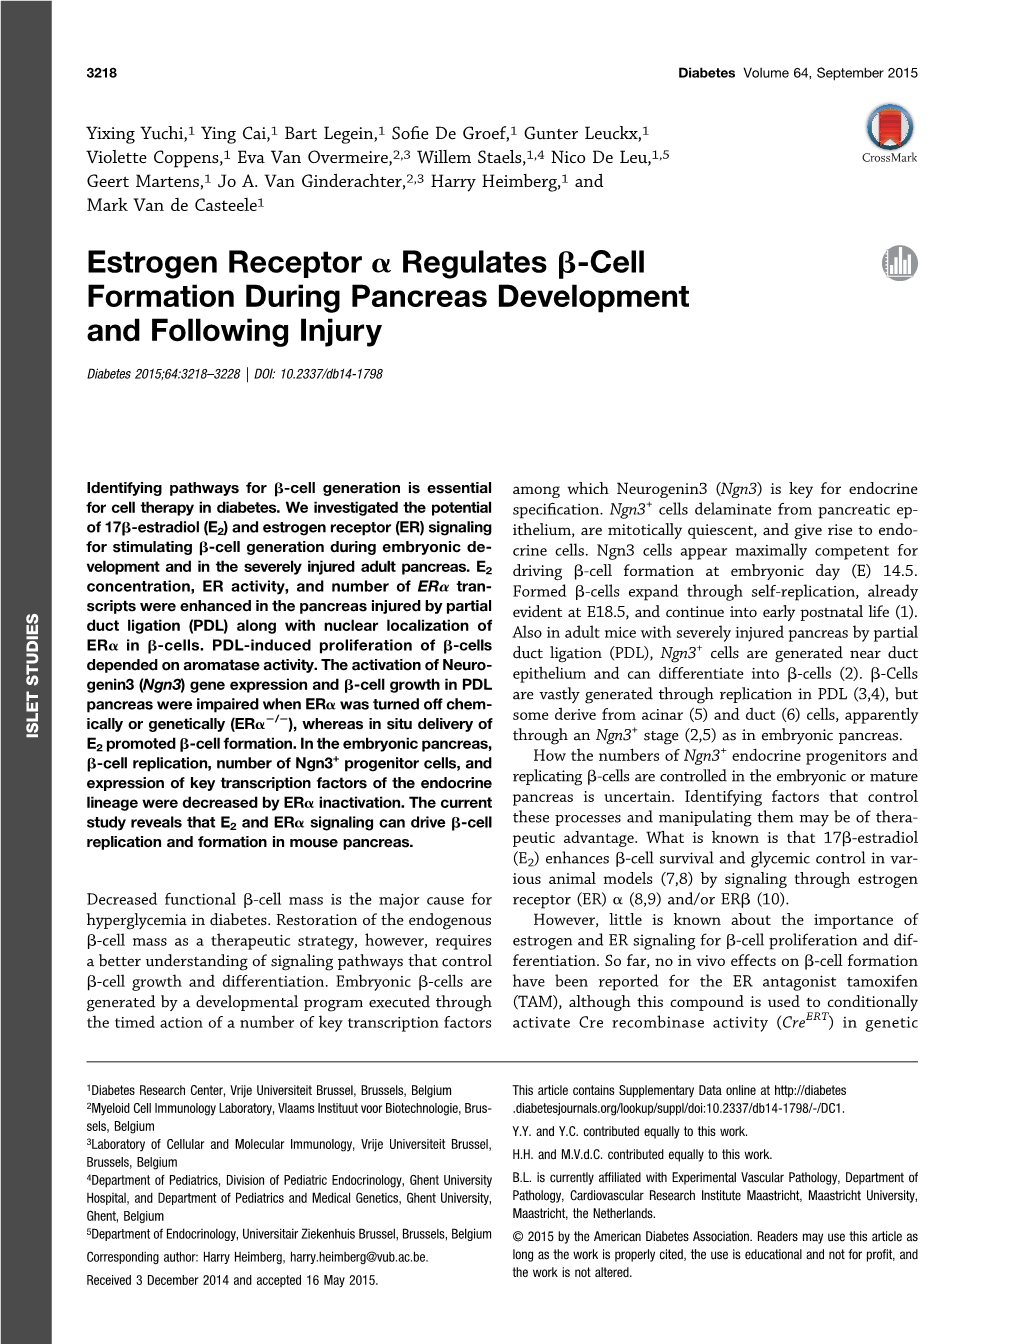 Estrogen Receptor a Regulates B-Cell Formation During Pancreas Development and Following Injury